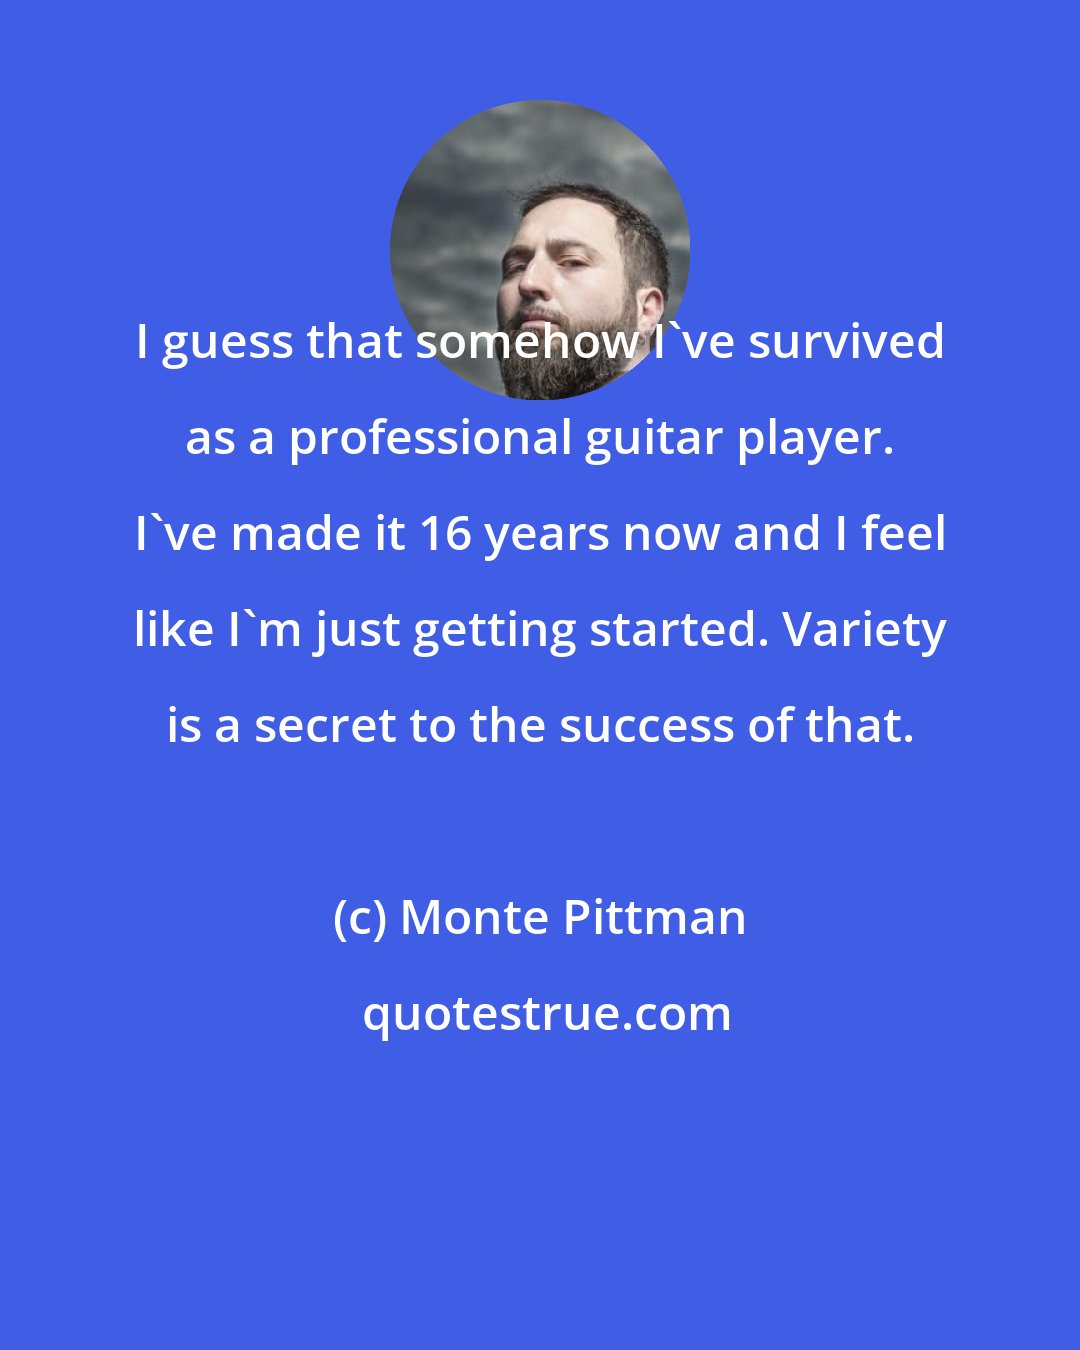 Monte Pittman: I guess that somehow I've survived as a professional guitar player. I've made it 16 years now and I feel like I'm just getting started. Variety is a secret to the success of that.